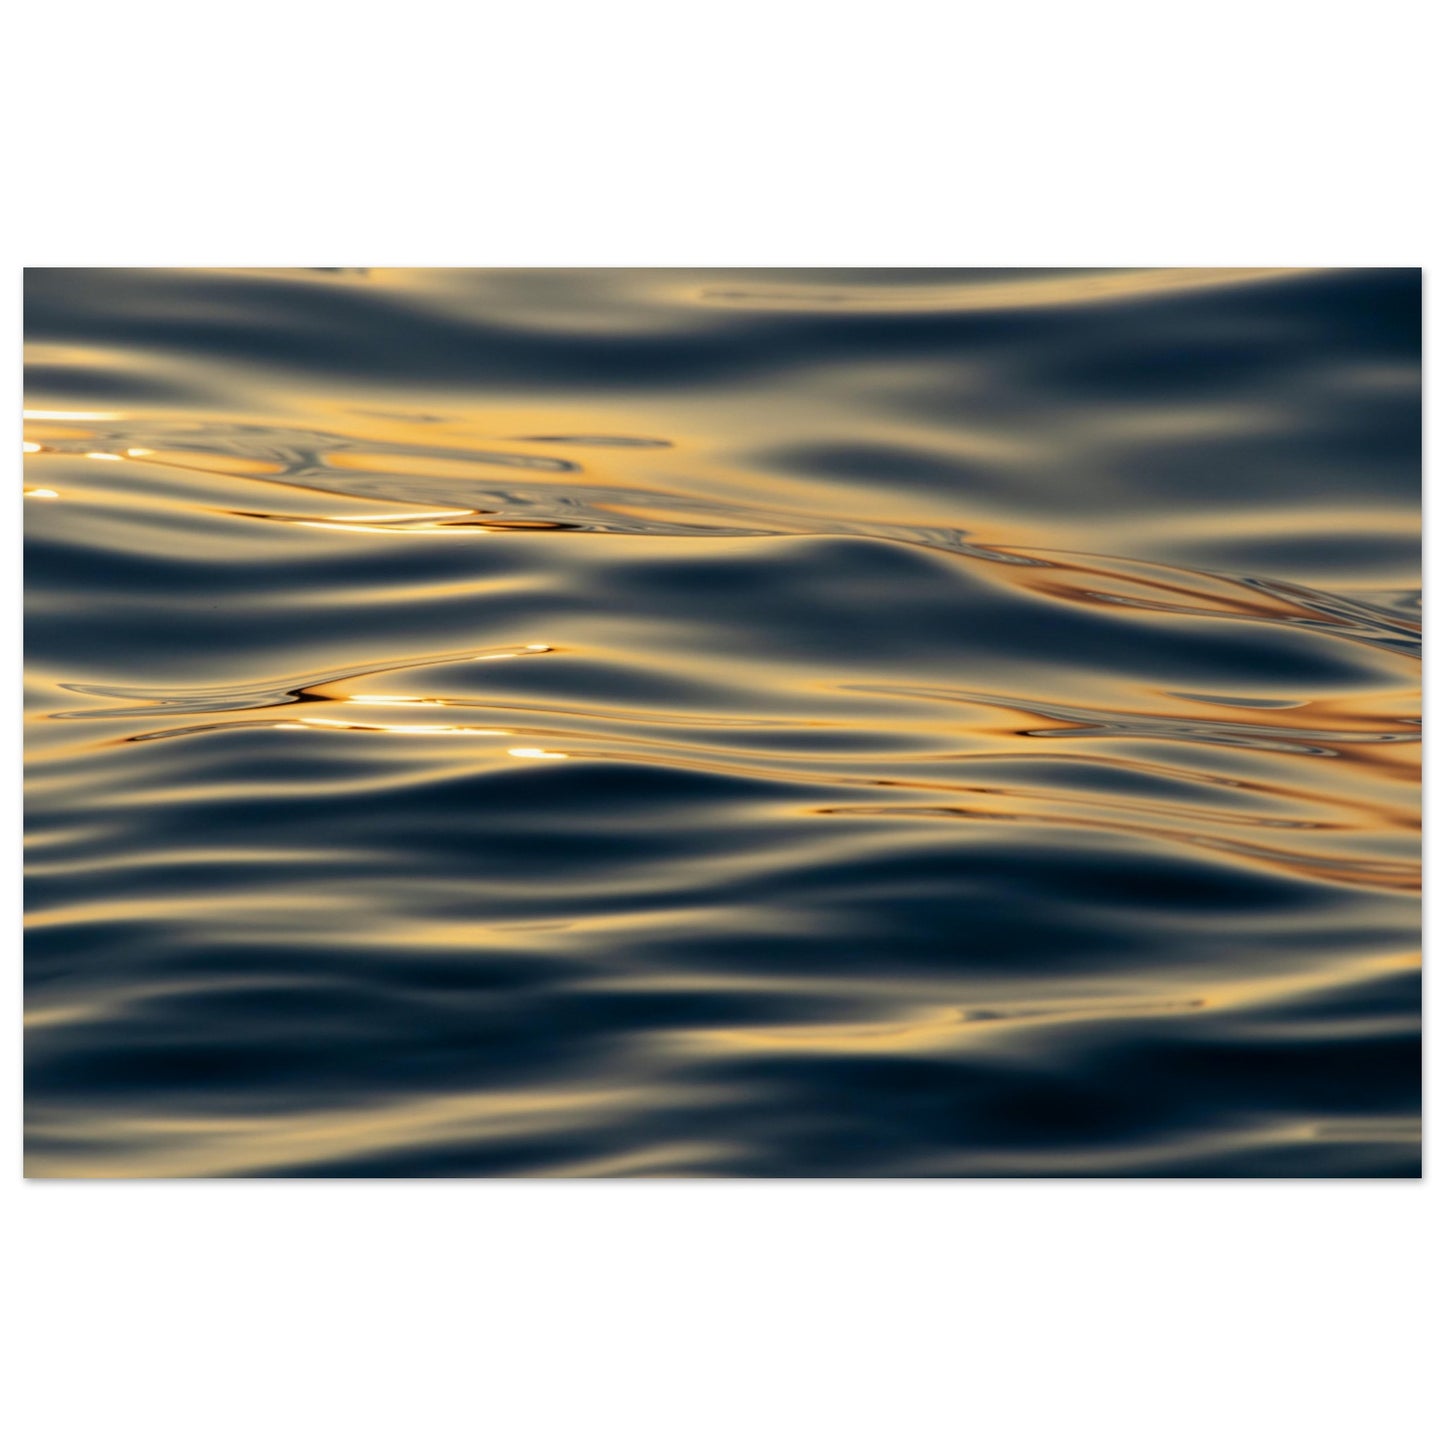 Glittering sea waves in the sunset - premium poster